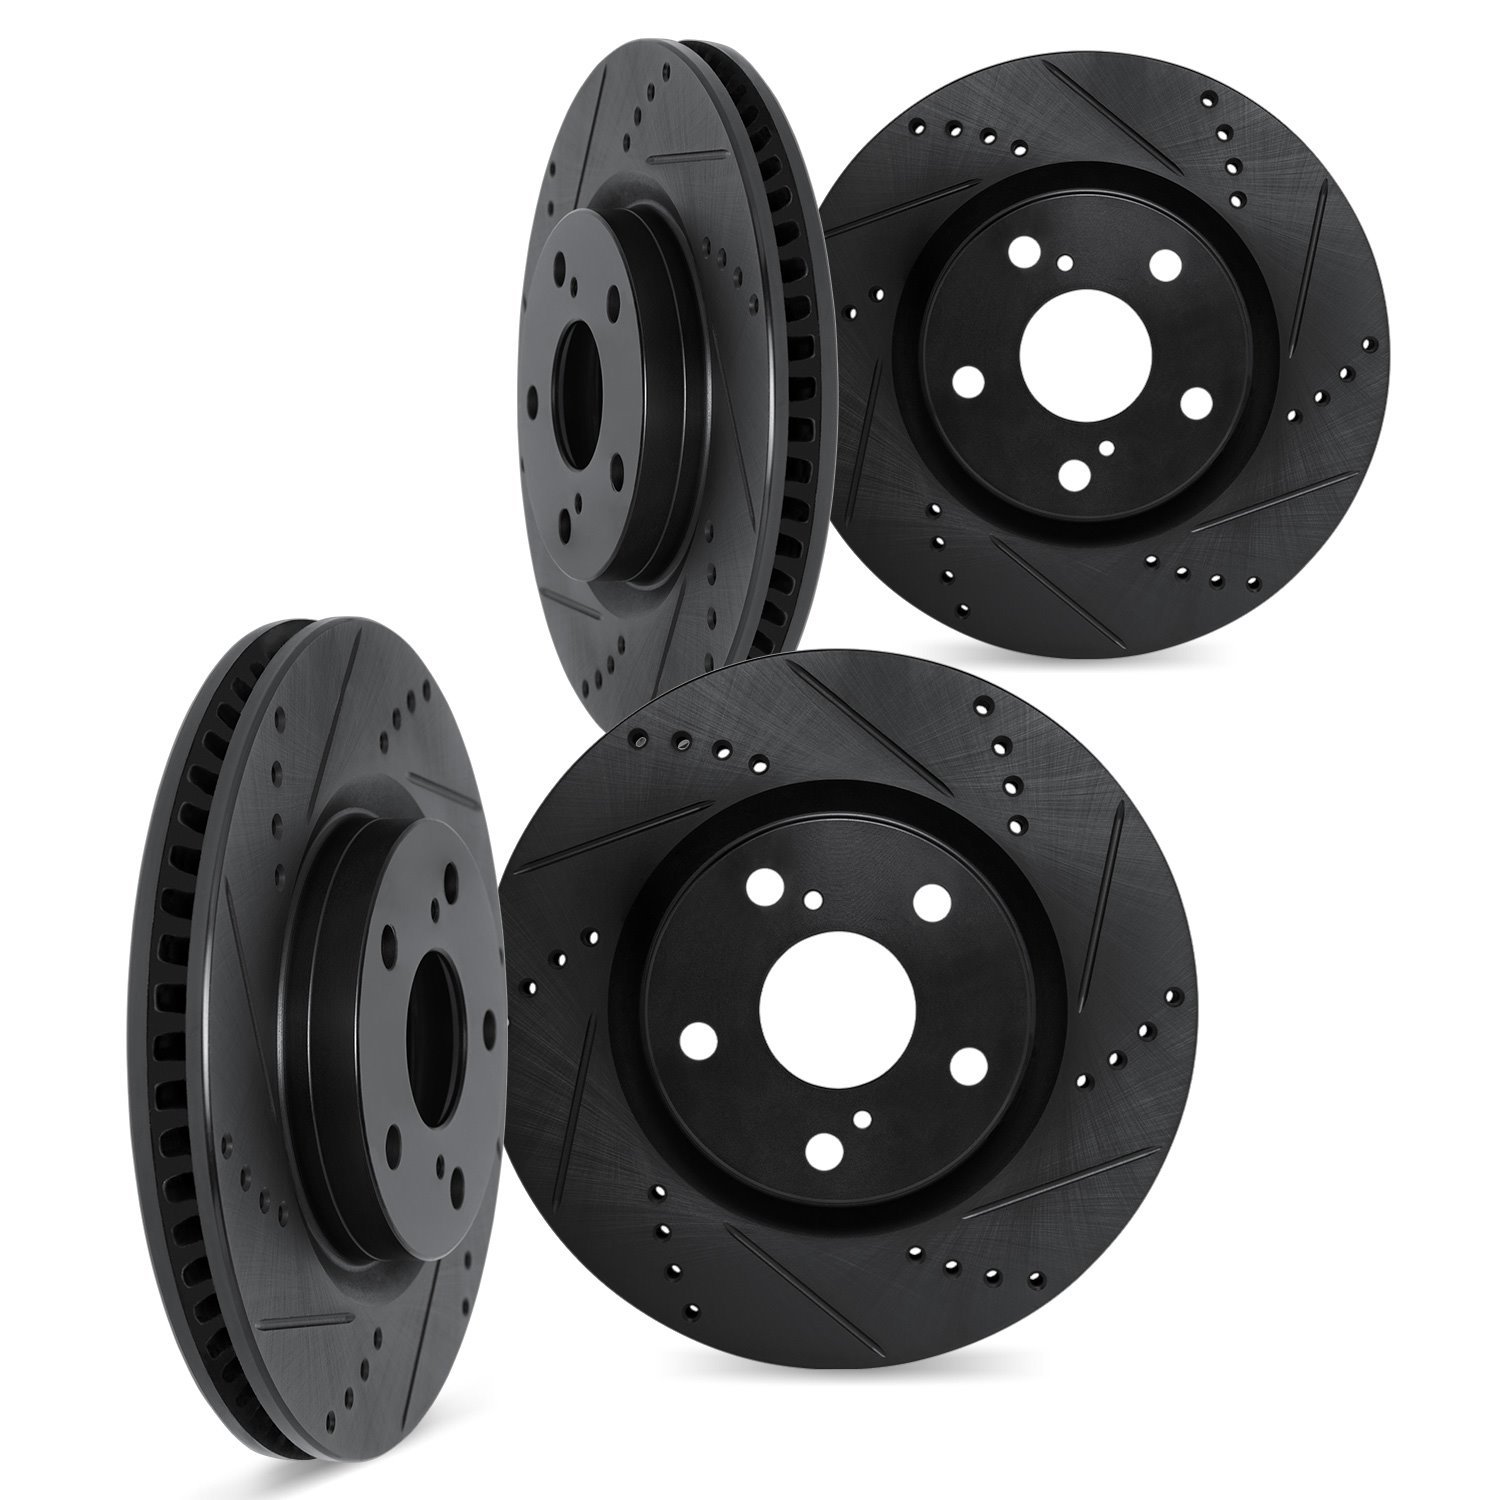 8004-54363 Drilled/Slotted Brake Rotors [Black], Fits Select Ford/Lincoln/Mercury/Mazda, Position: Front and Rear